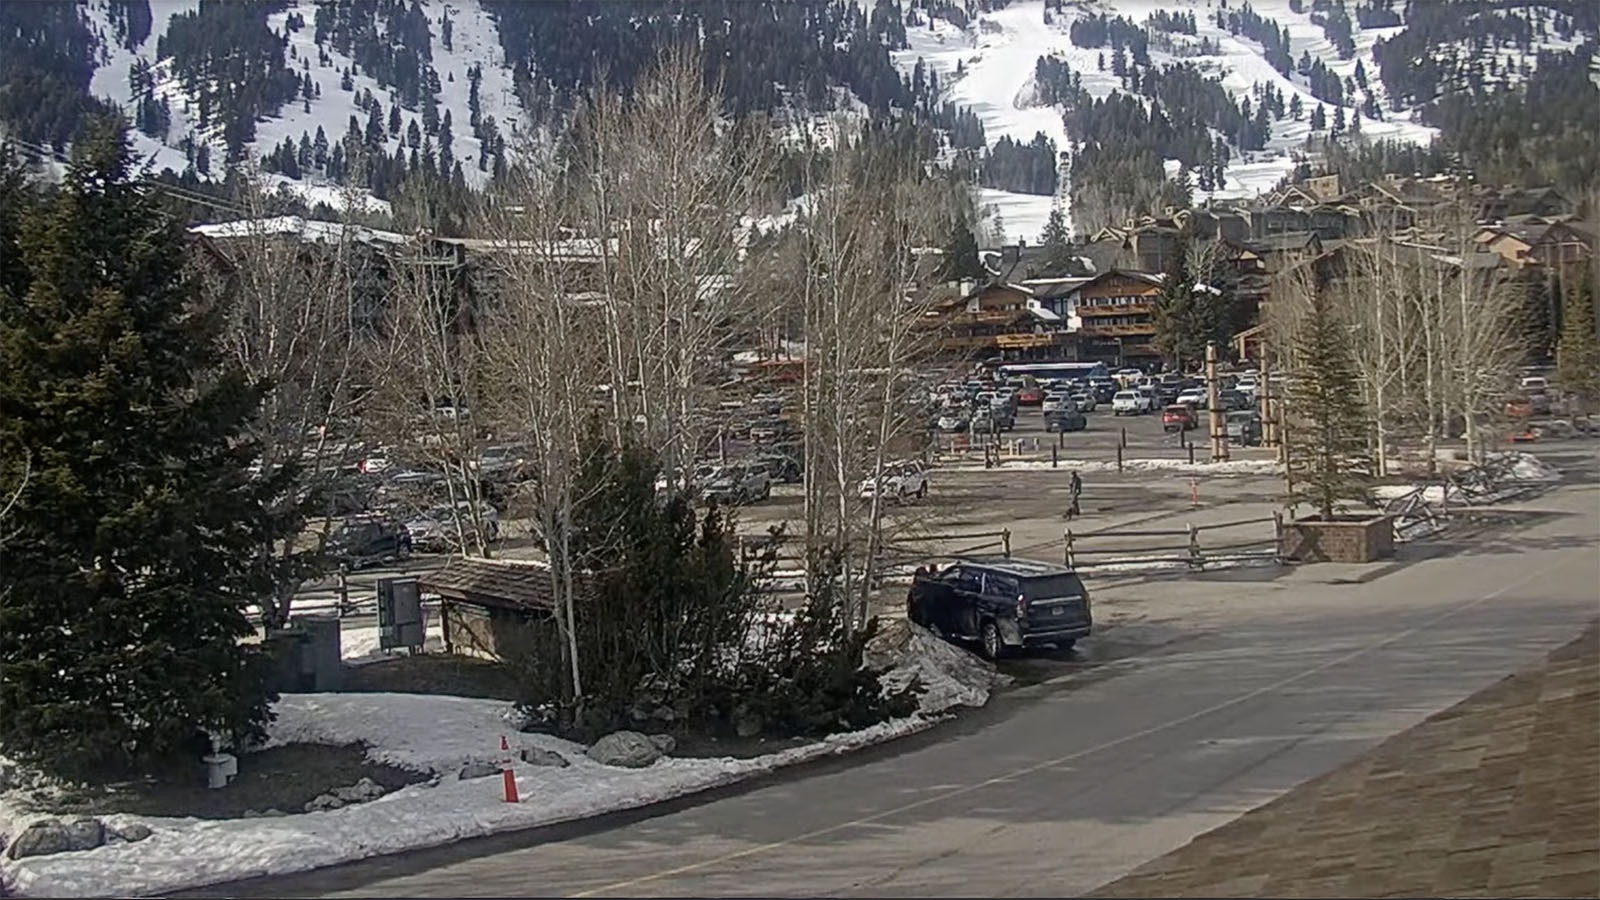 Parking lots at Teton Village fill up fast even at $35-$45 dollars a day. Because Jackson Hole Mountain Resort workers are required to pay for parking, they've been exploiting a hack to park free — until a local cartoonist outed the hack.